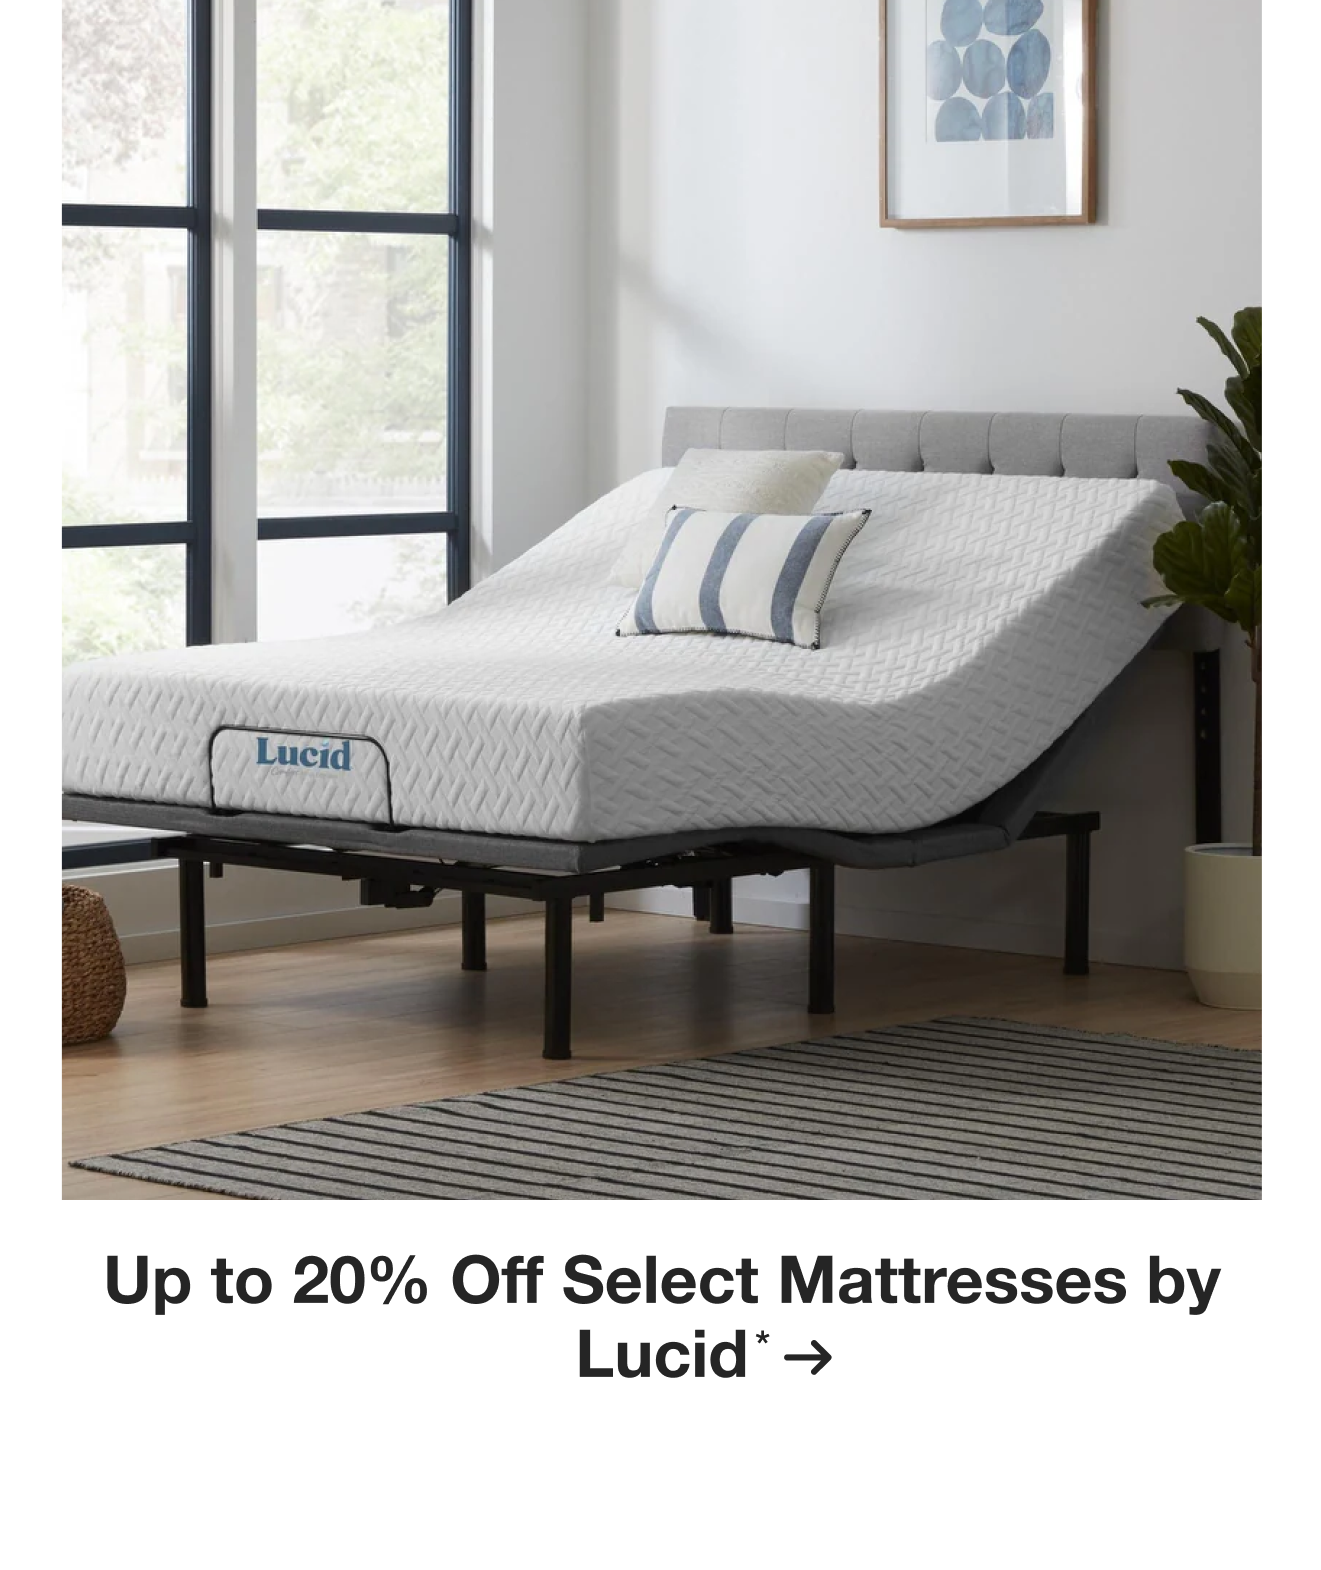 Up to 20% Off Select Mattresses by Lucid*